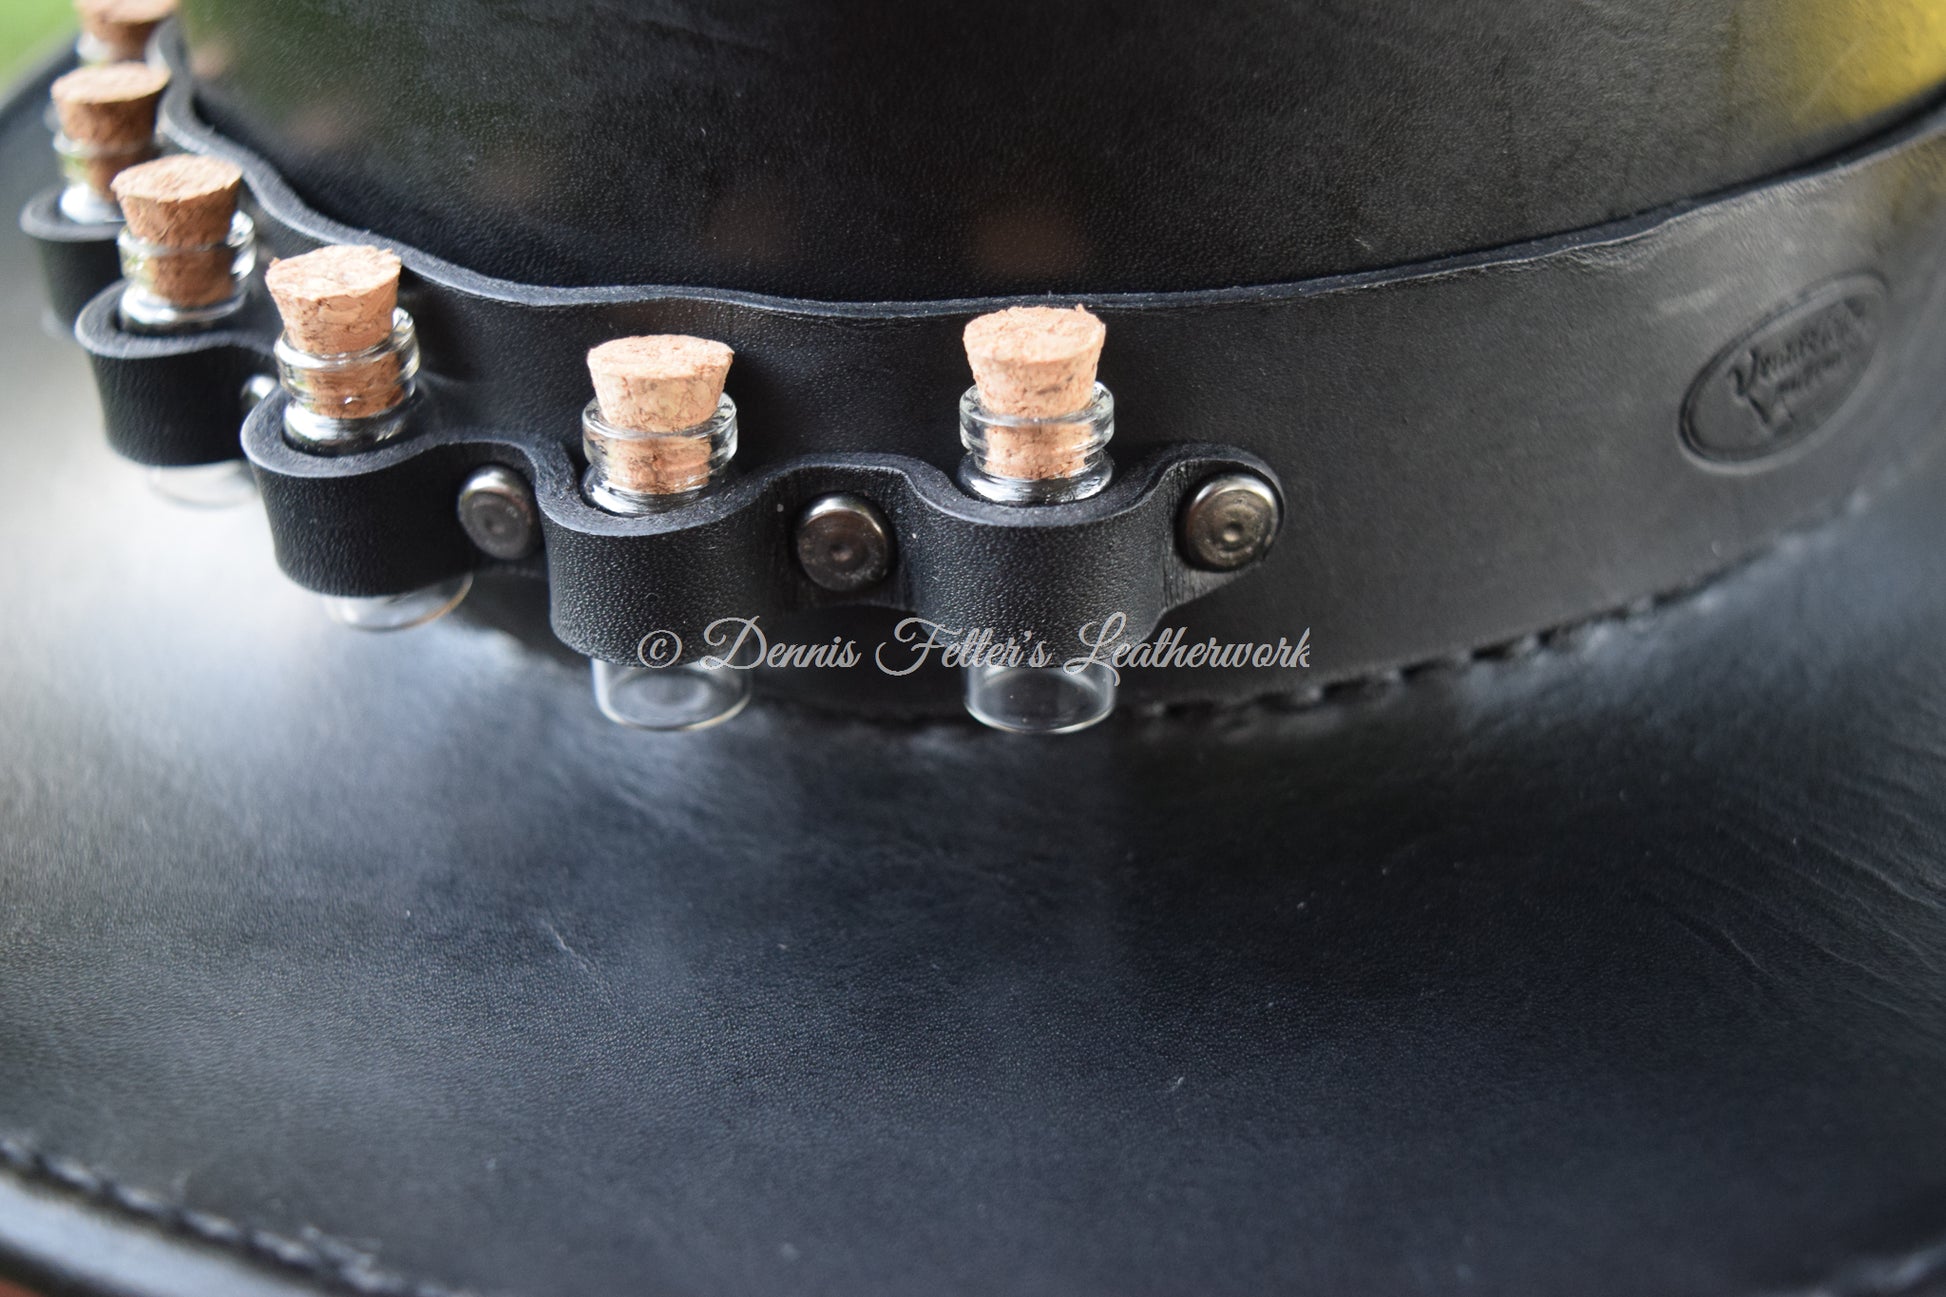 black leather alchemist / plague doctor hat - close up of the crown strap holding the glass vials with corks